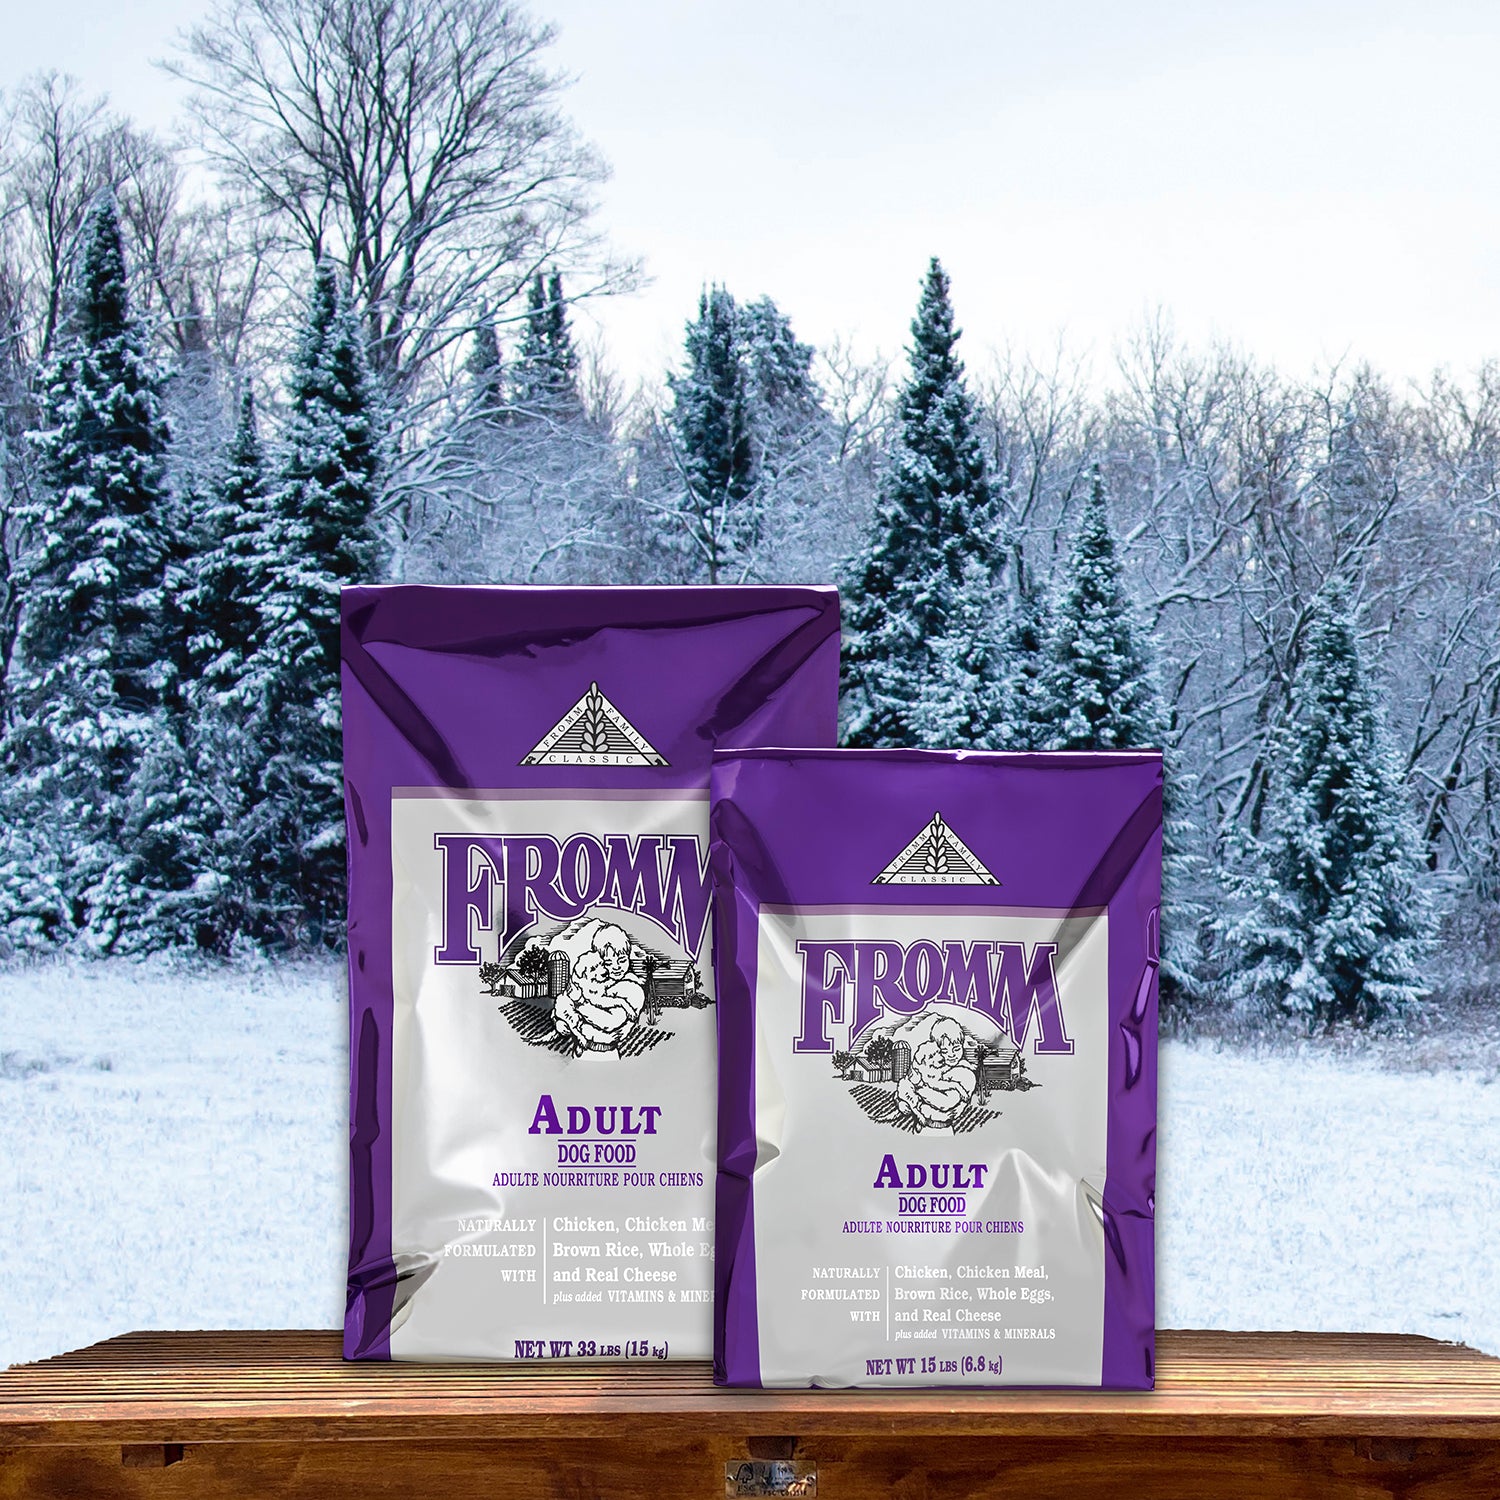 Fromm Dry Dog Food Classic Adult